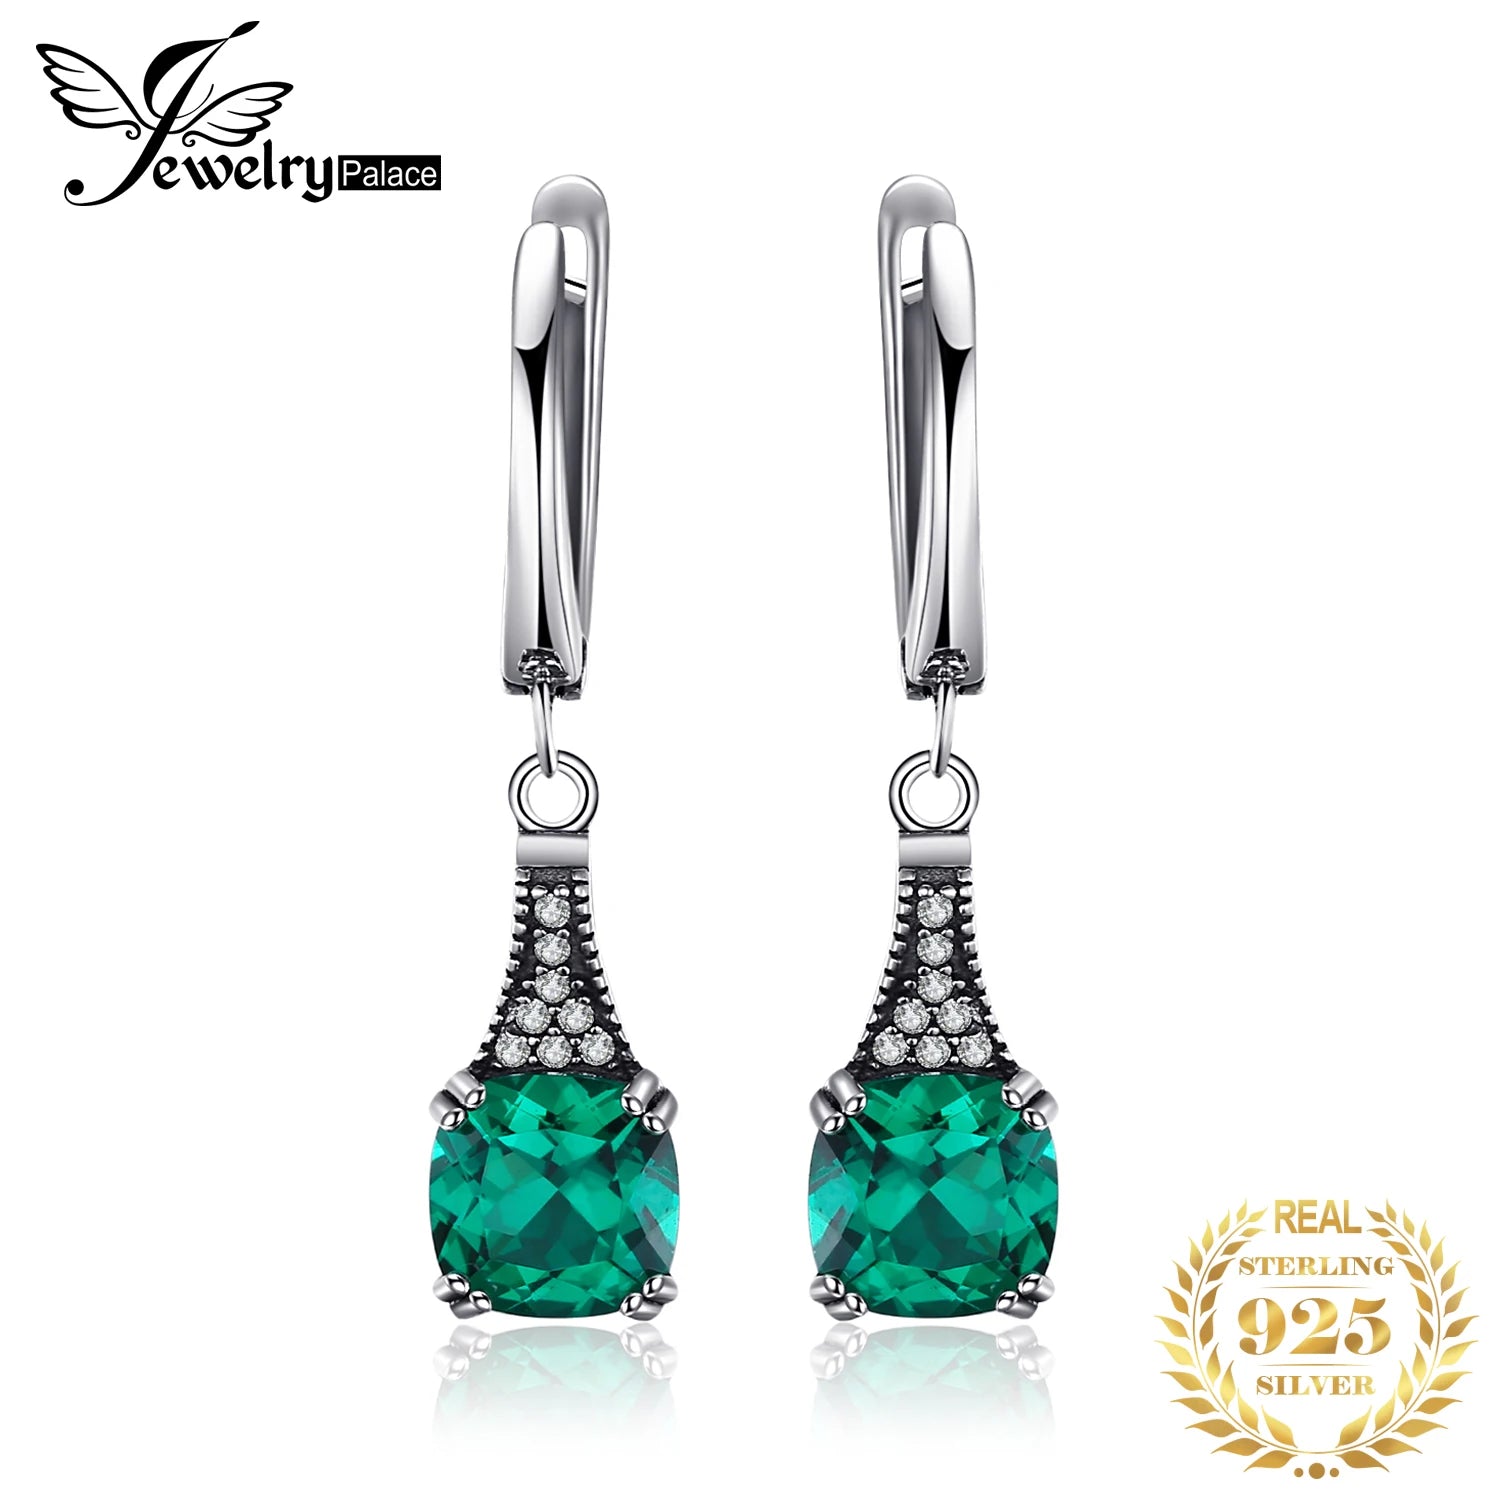 JewelryPalace Vintage 2.1ct Cushion Simulated Nano Emerald 925 Sterling Silver Hoop Earrings for Woman Gemstone Fashion Jewelry Default Title